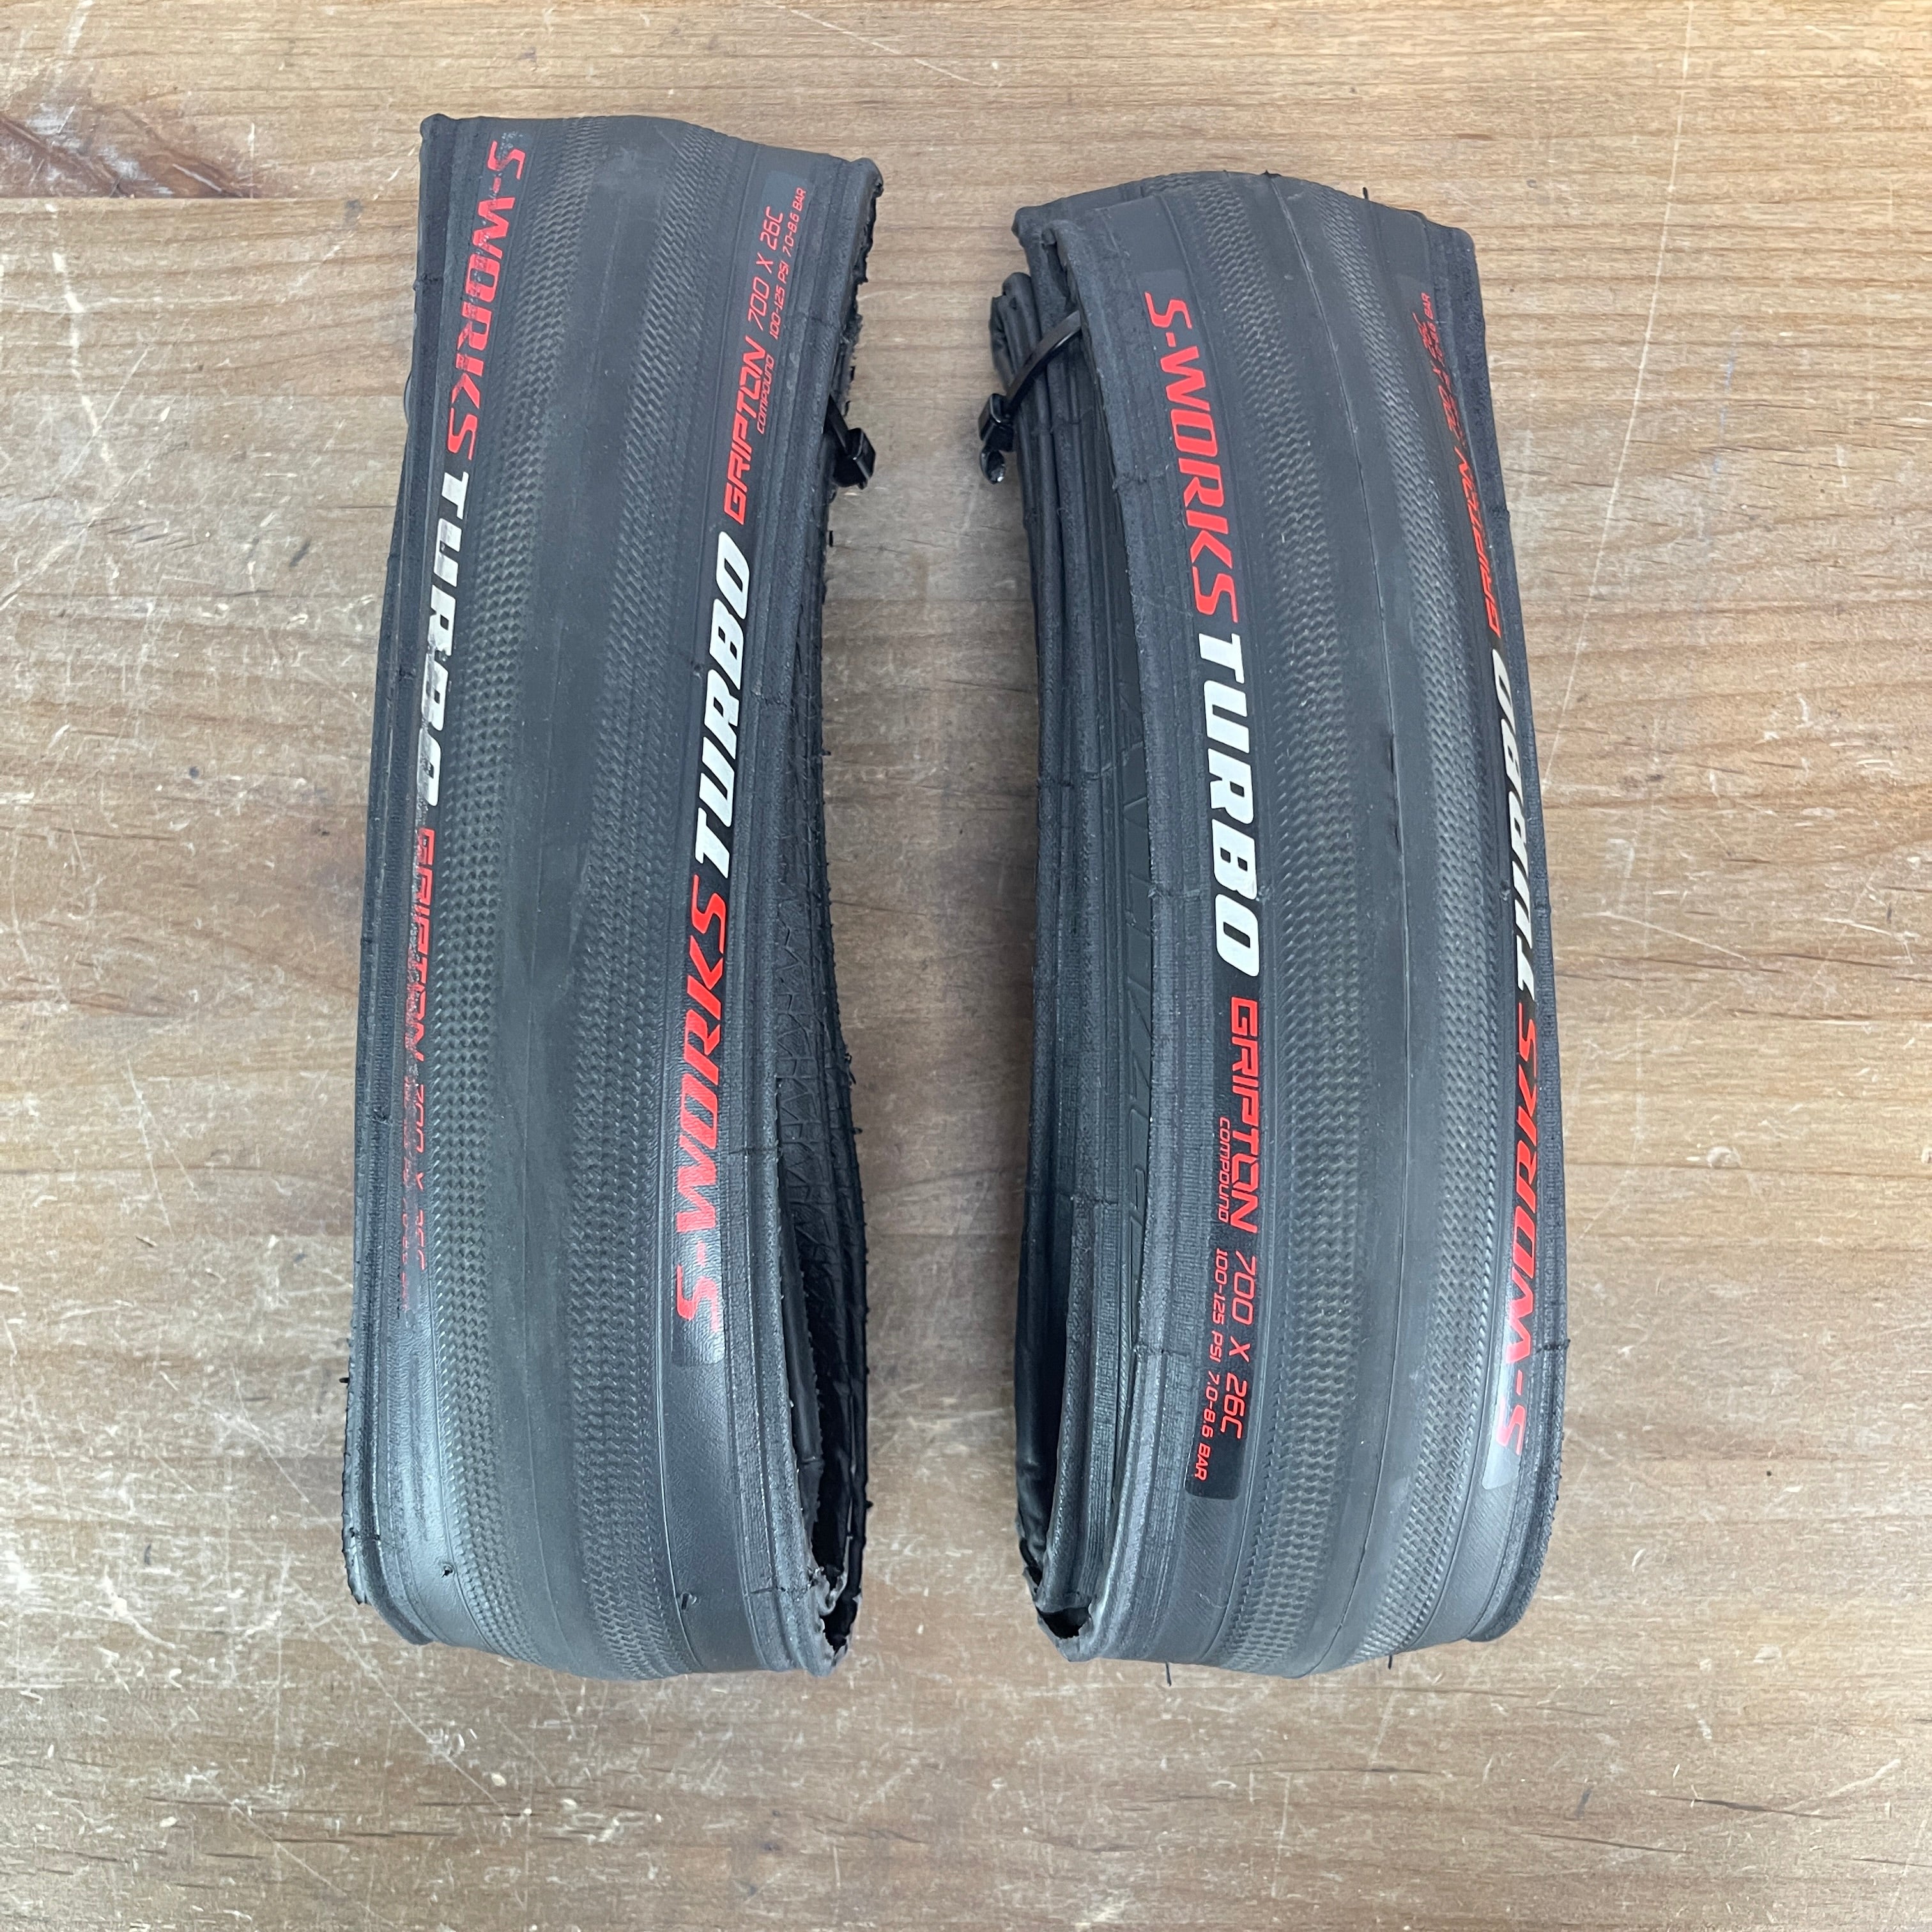 Specialized S-works Turbo 700c x 26mm Clincher Pair Road Bike Tires –  CyclingUpgrades.com